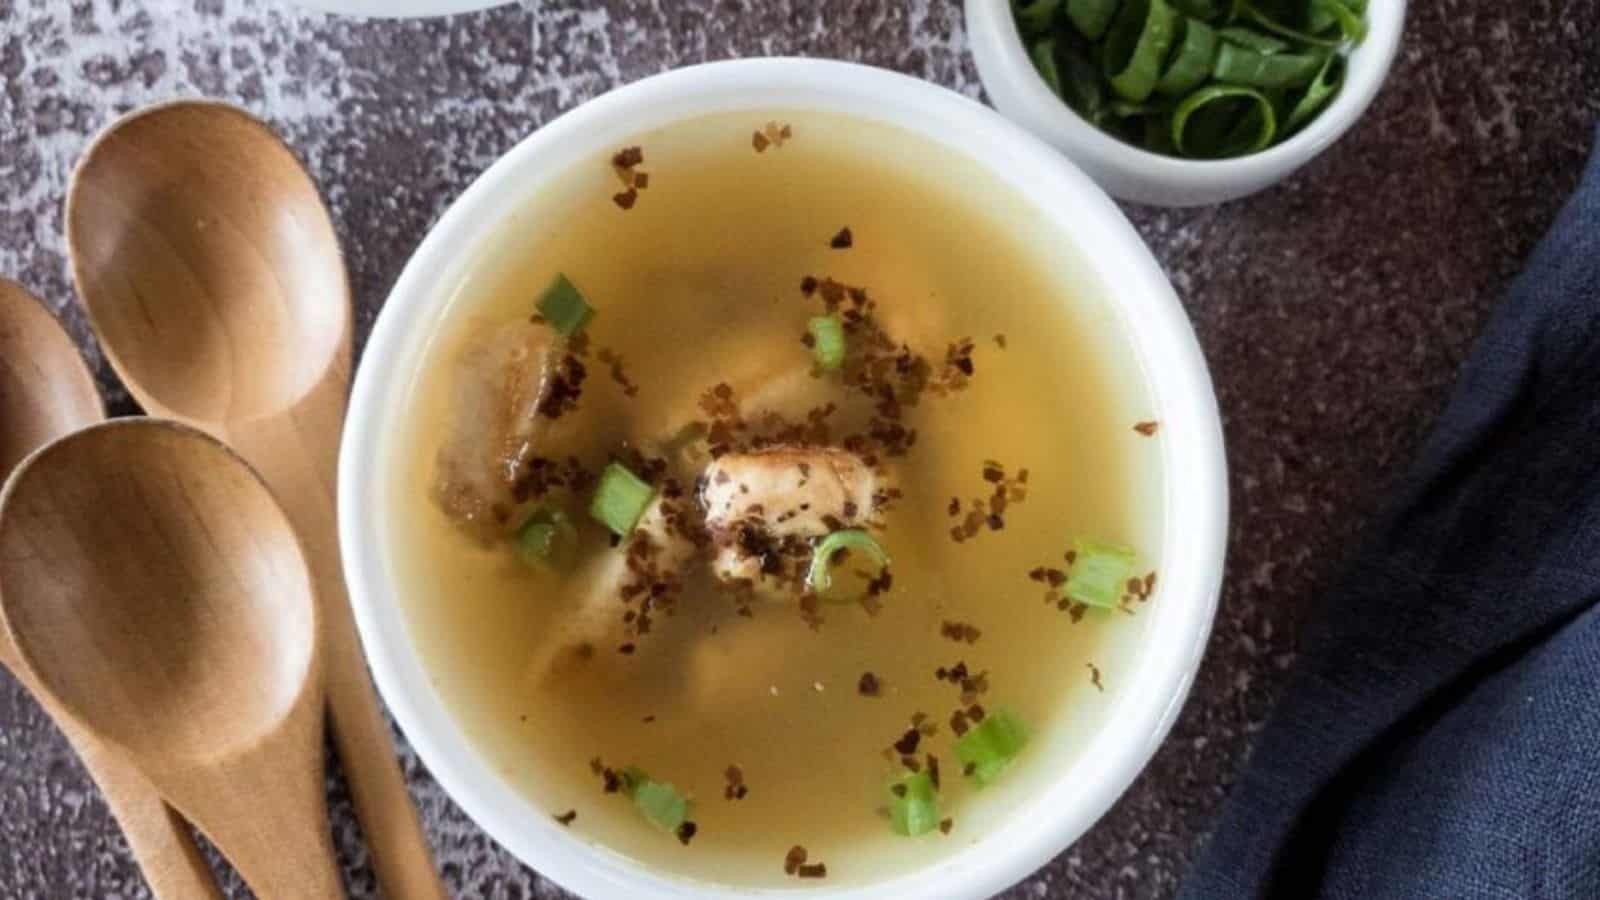 Chicken Miso Soup with seaweed and green onion garnish in a white soup bowl.